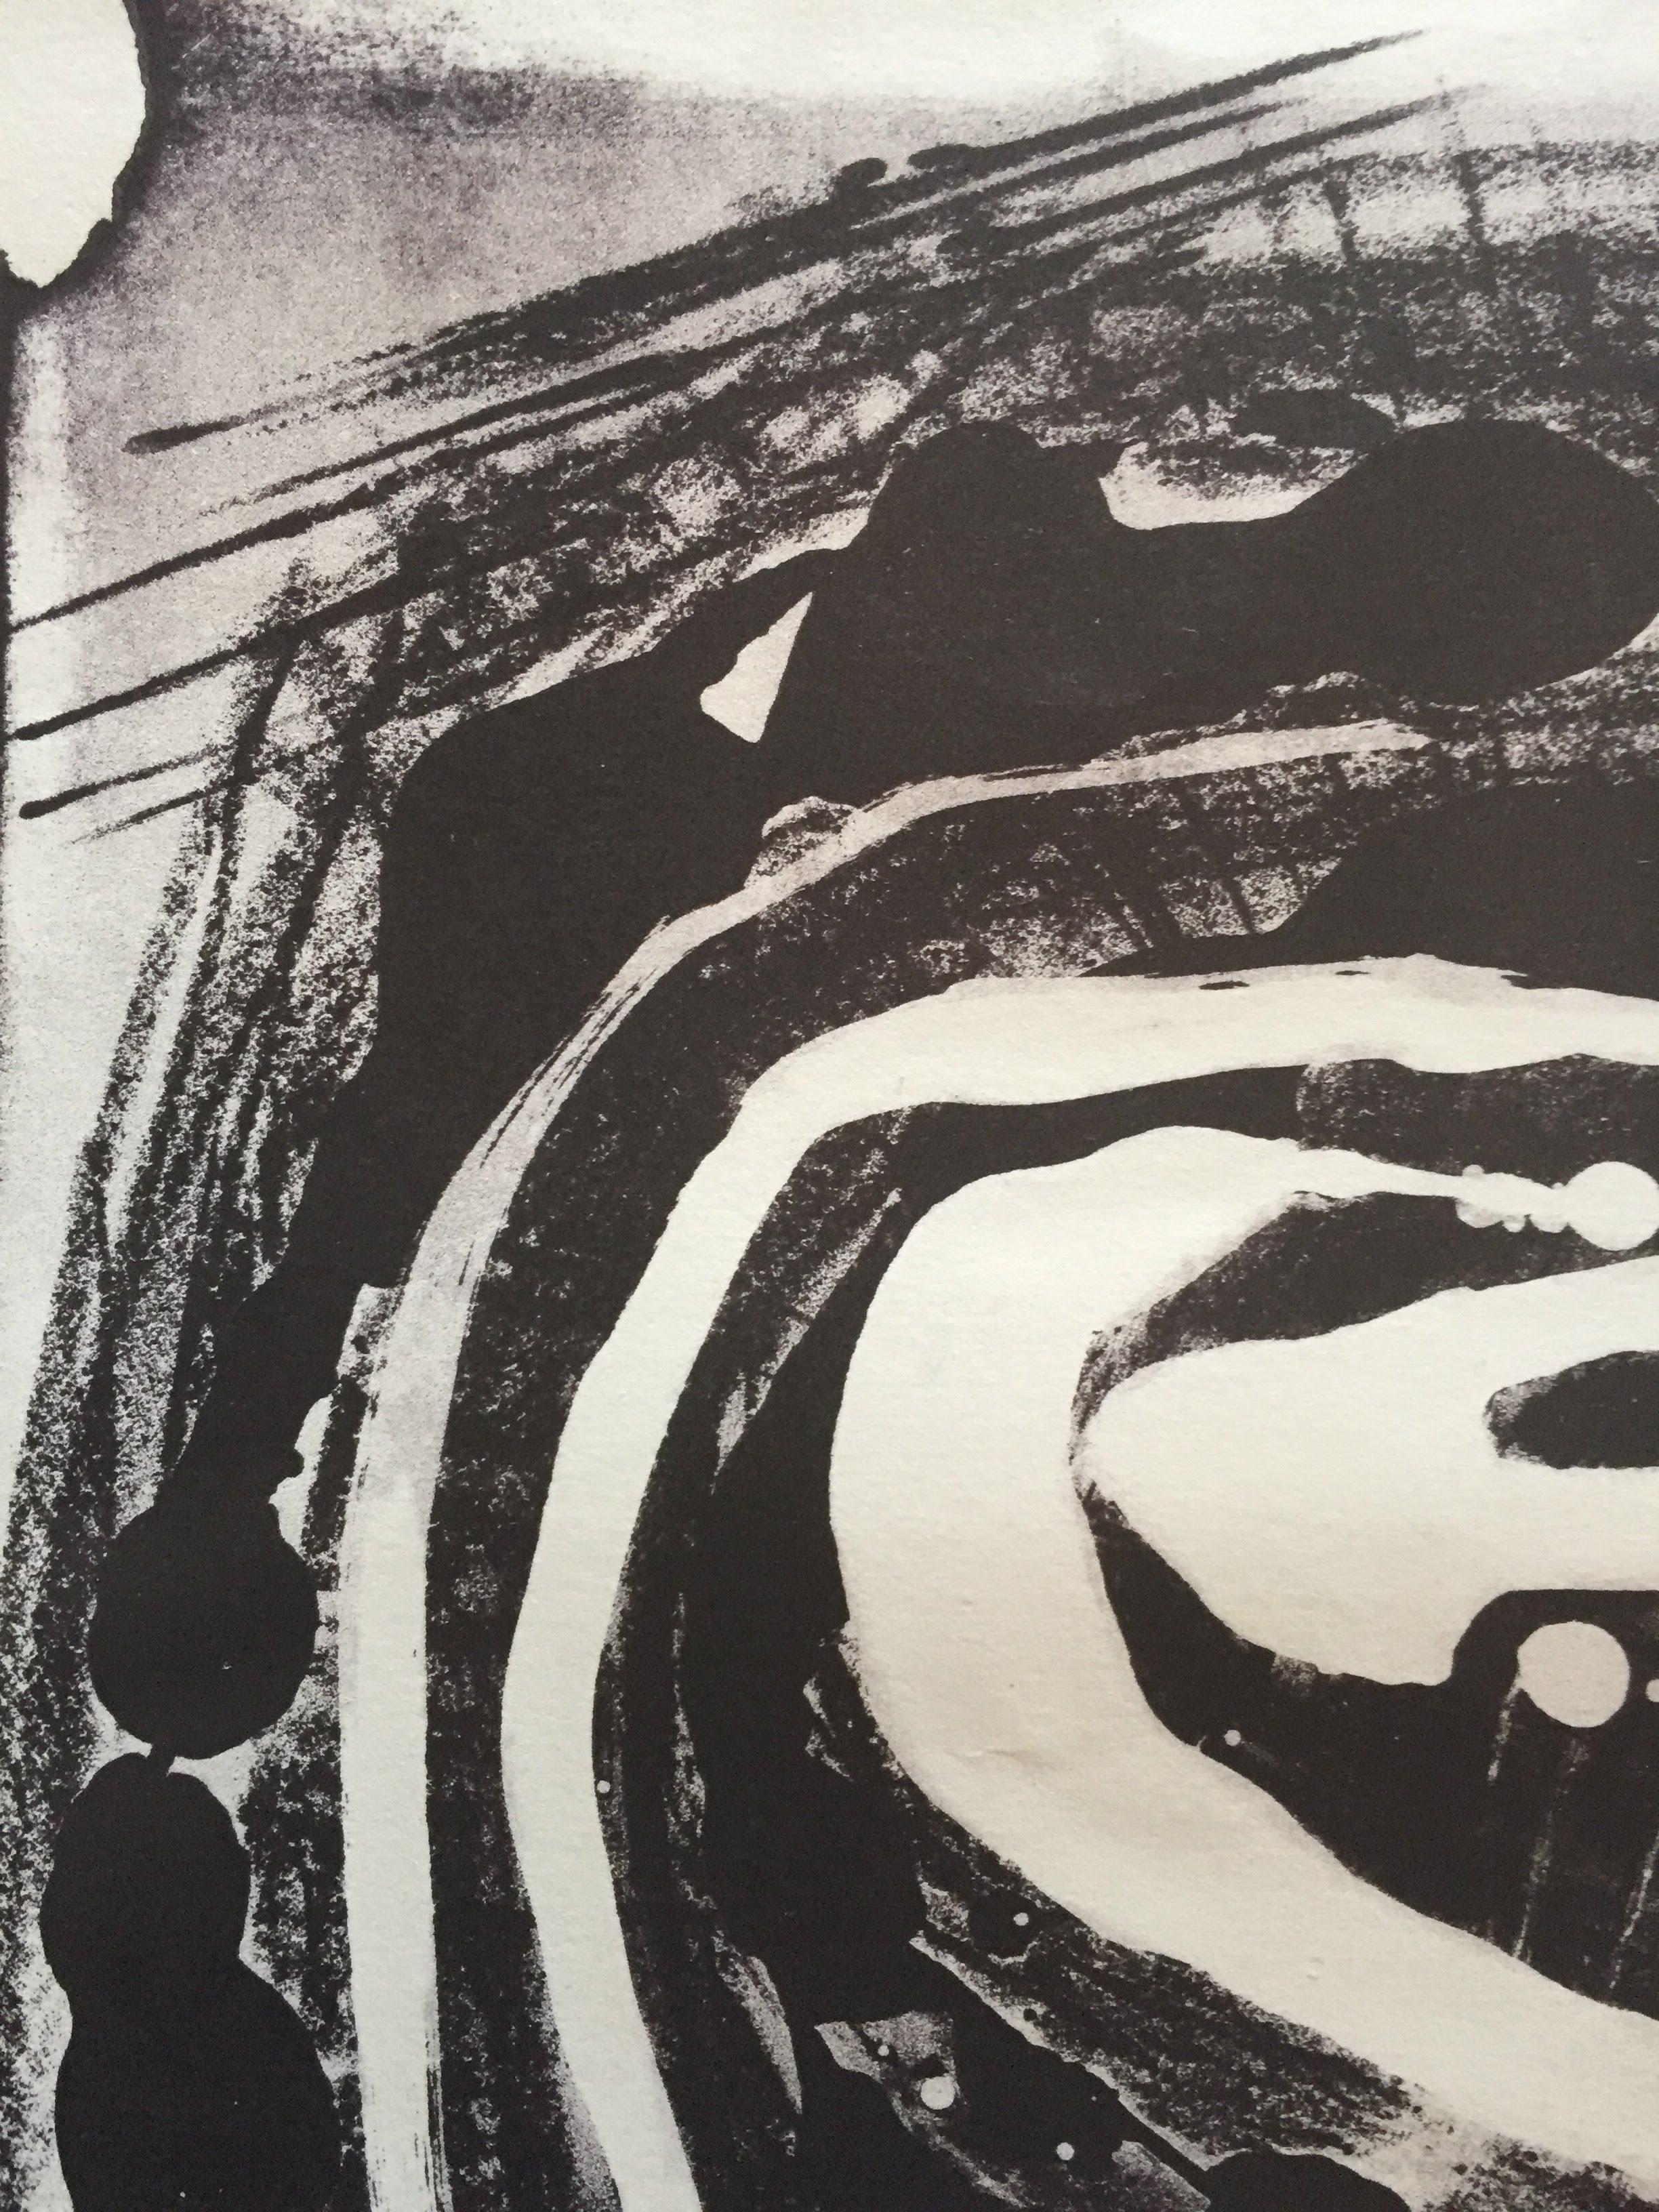 Abstract Stone Lithograph 1950s San Francisco Black and White Original Art For Sale 1